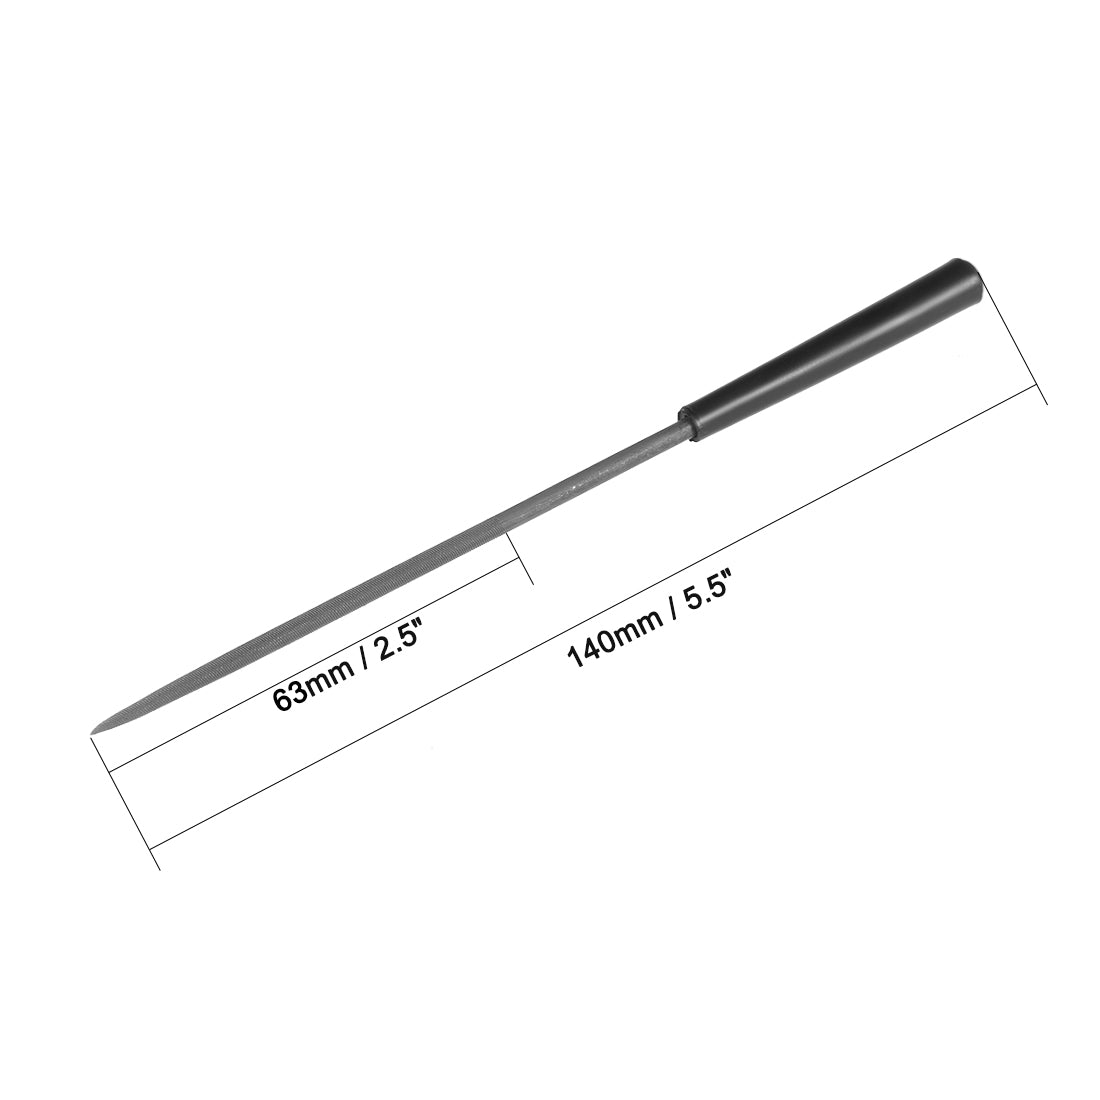 uxcell Uxcell Second Cut Steel Round Needle File with Plastic Handle, 3mm x 140mm